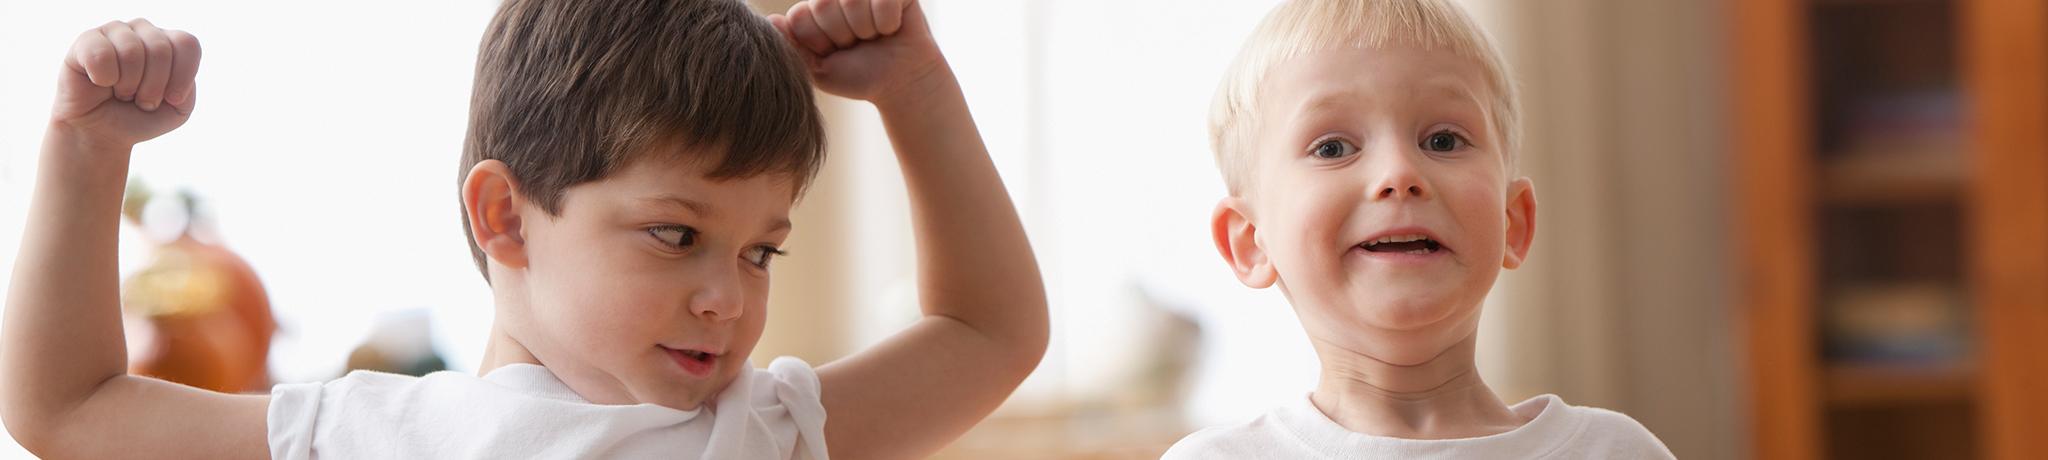 Two boys flexing muscles